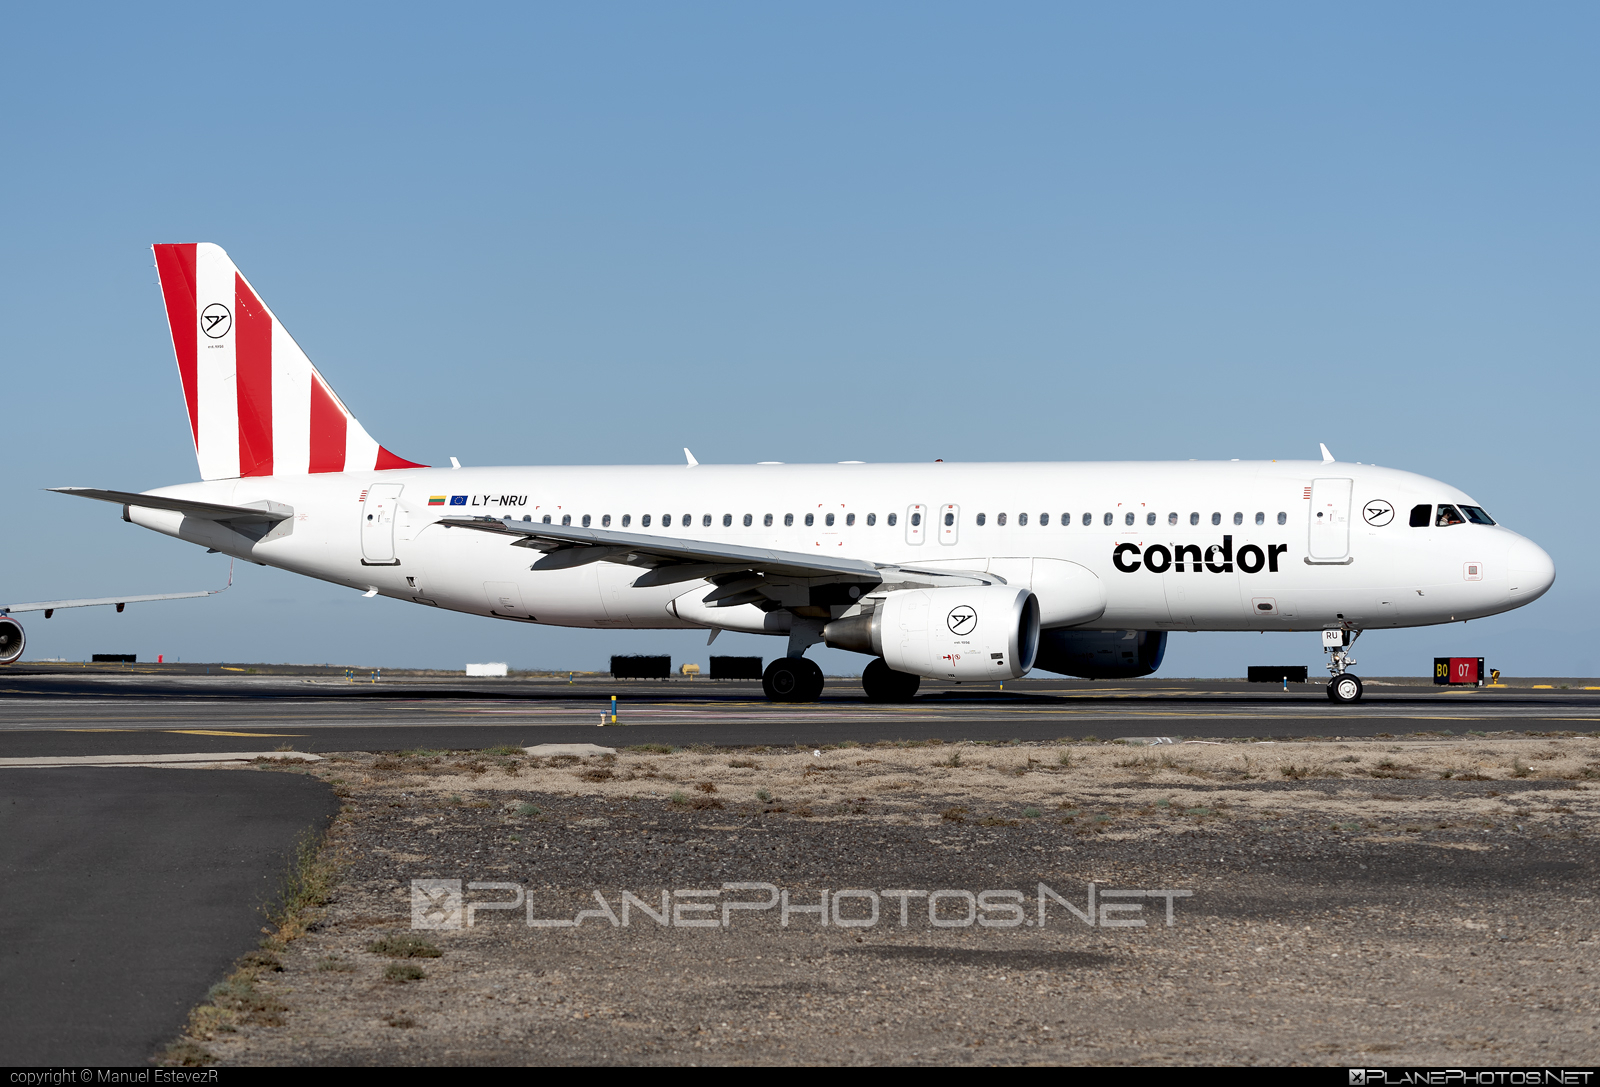 Airbus A320-214 - LY-NRU operated by Condor #a320 #a320family #airbus #airbus320 #condor #condorAirlines